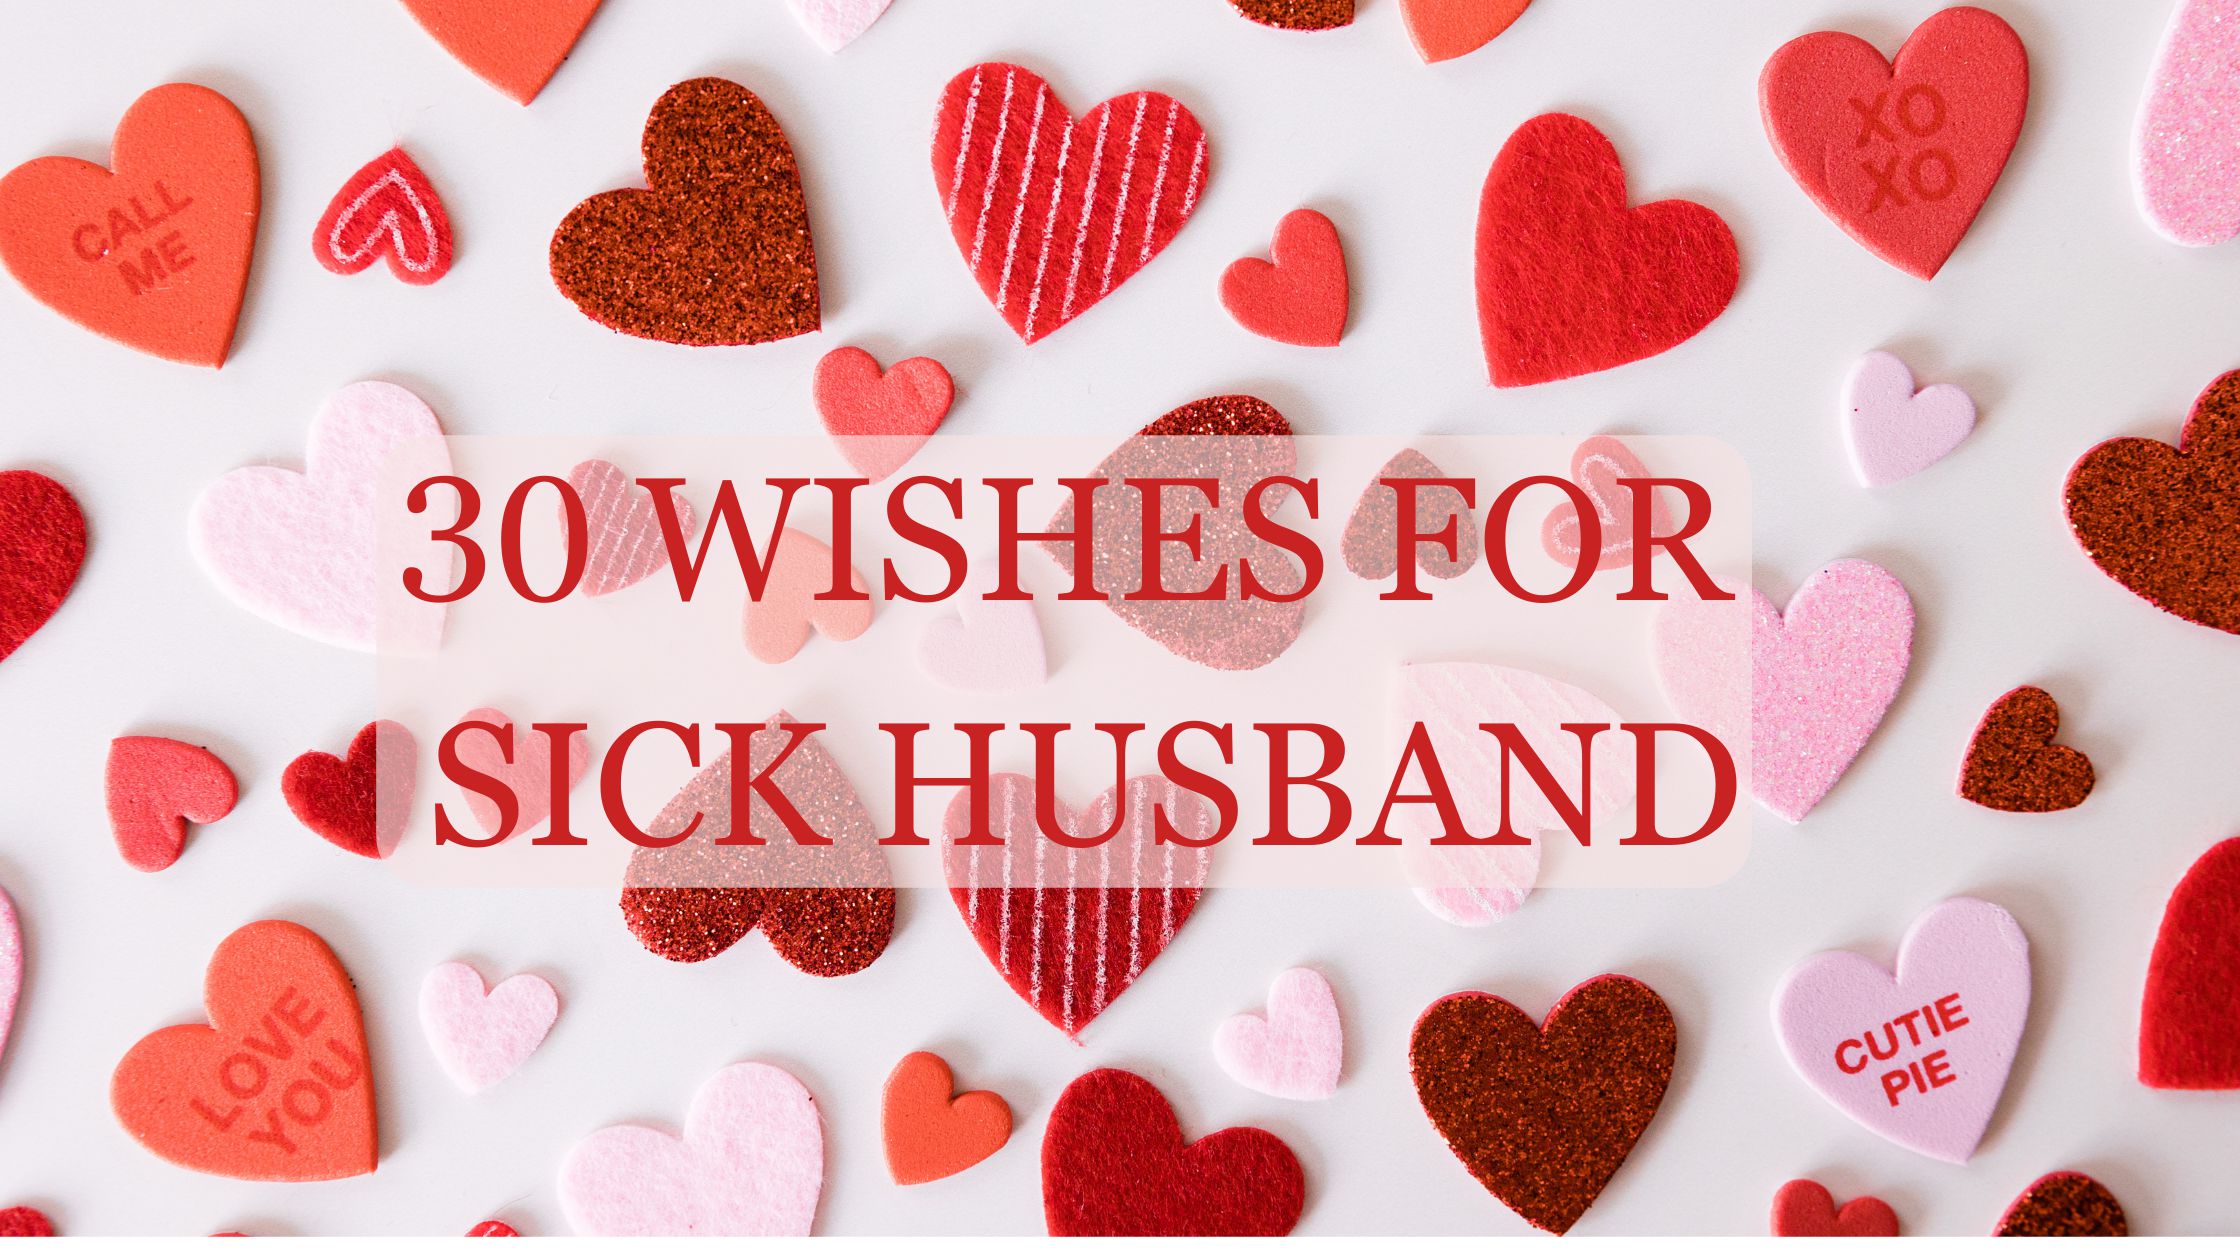 30 wishes for sick husband